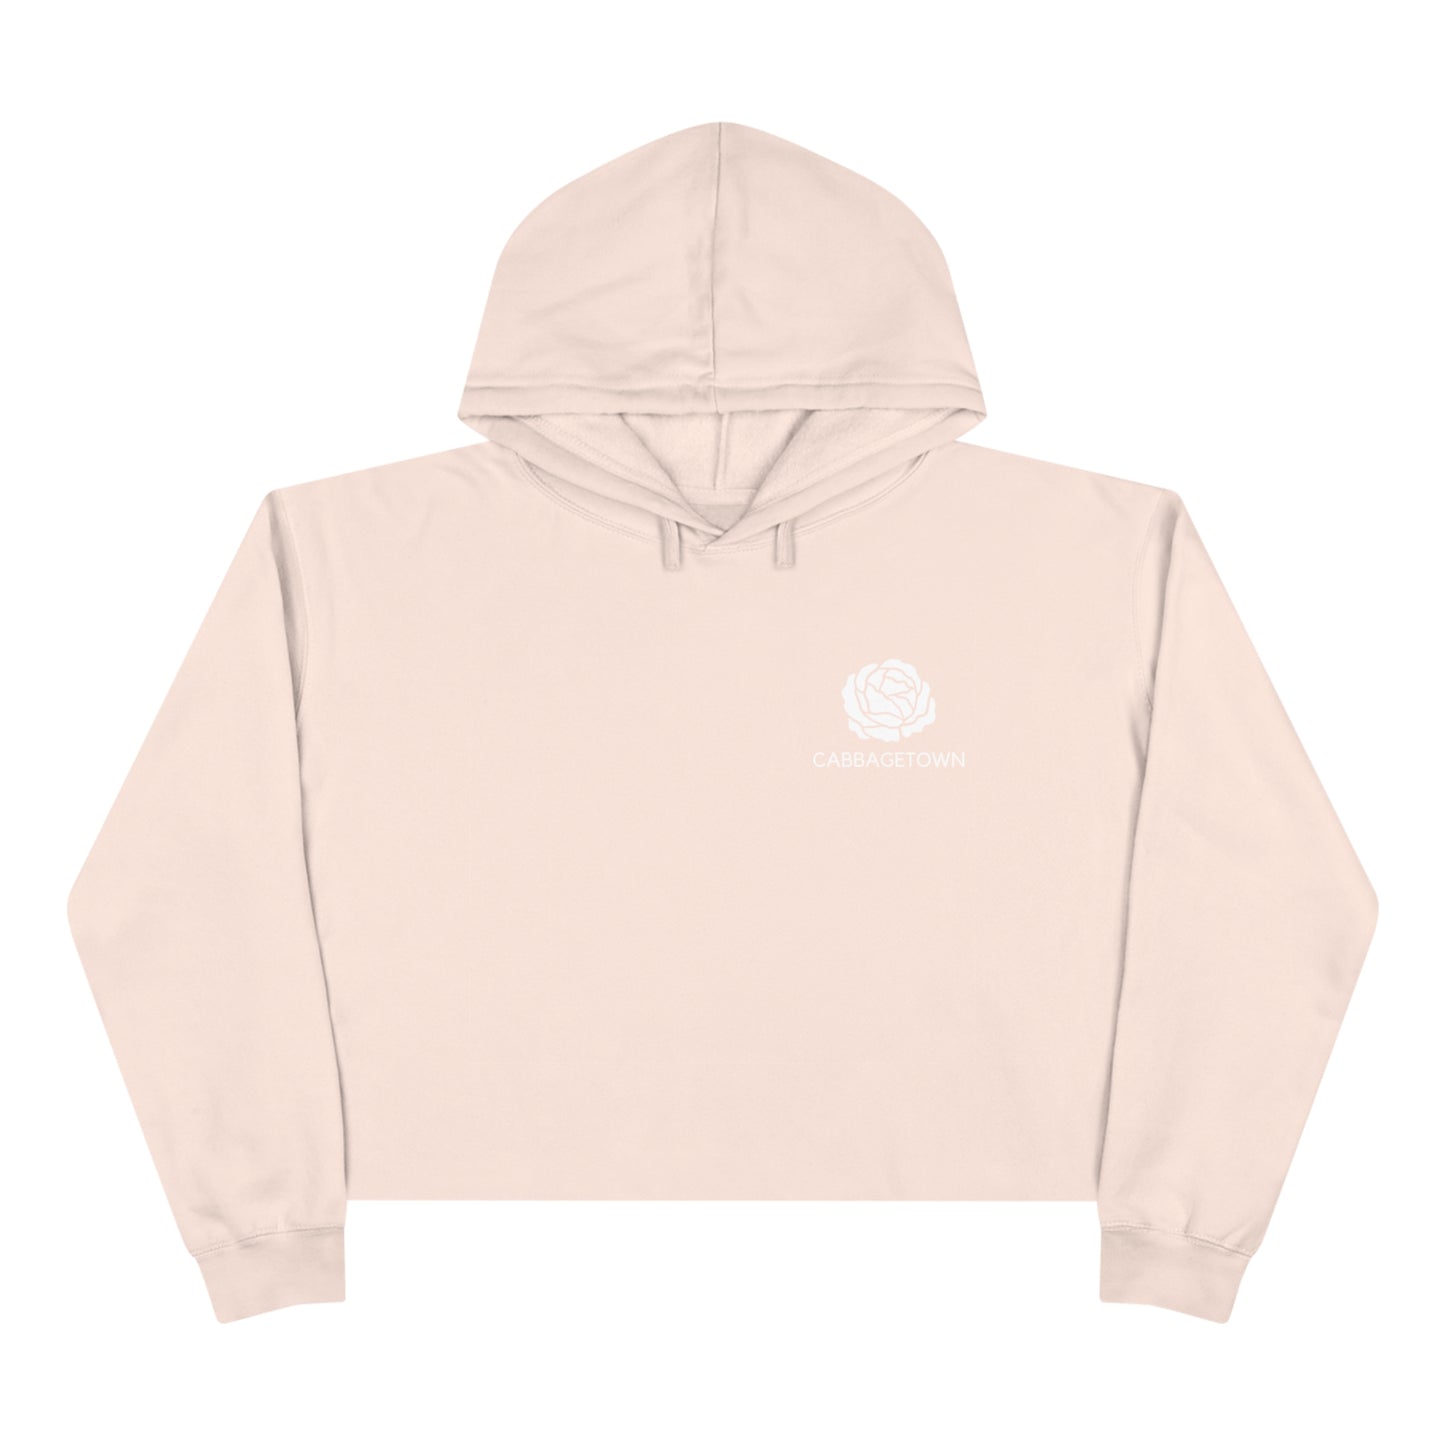 A pale pink Crop Hoodie with Monochrome Cabbagetown and Super Bargain Logo on the left chest area, displayed on a plain white background.